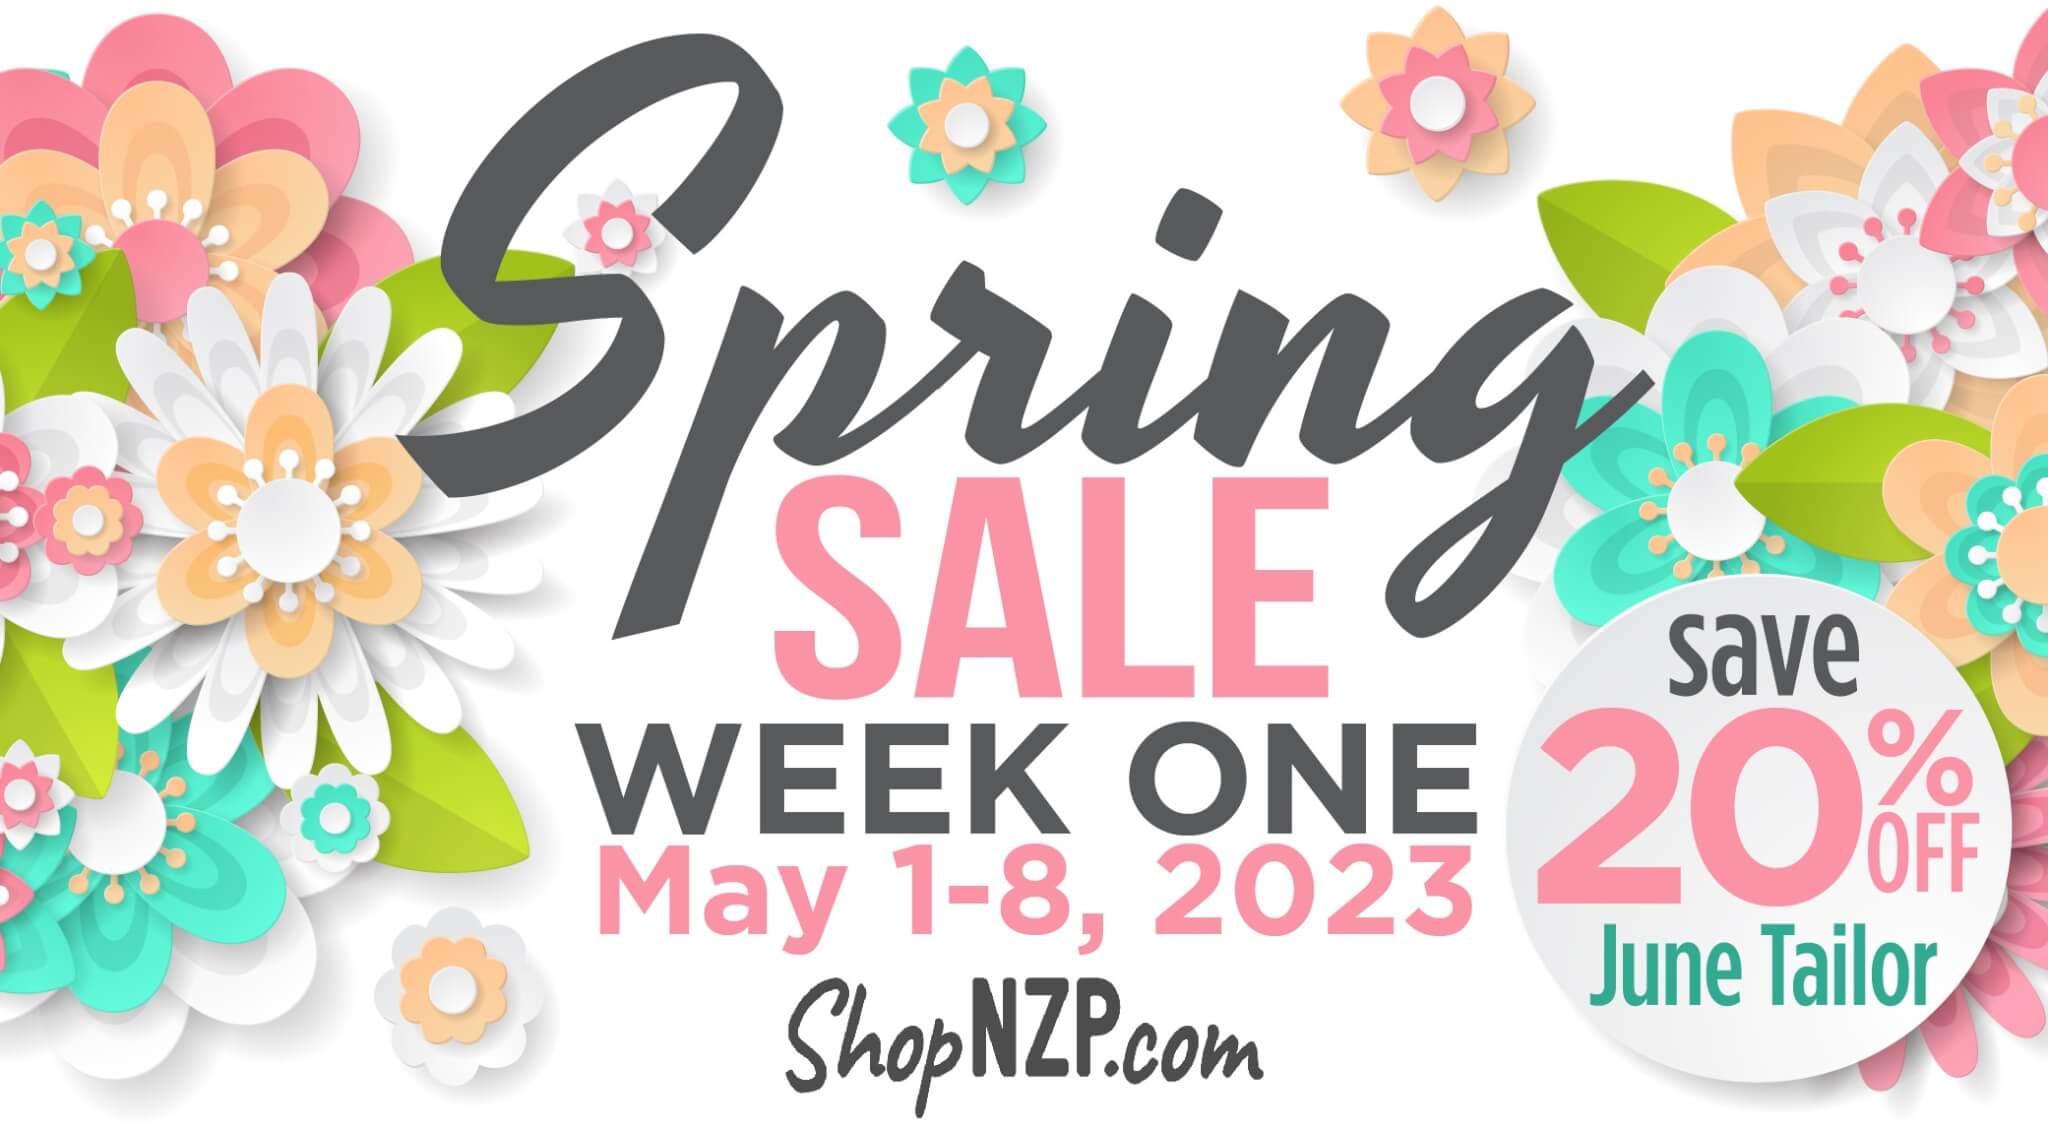 SPRING Sale Week One Save 20 Percent Off June Tailor at Nancy Zieman Productions at ShopNZP.com